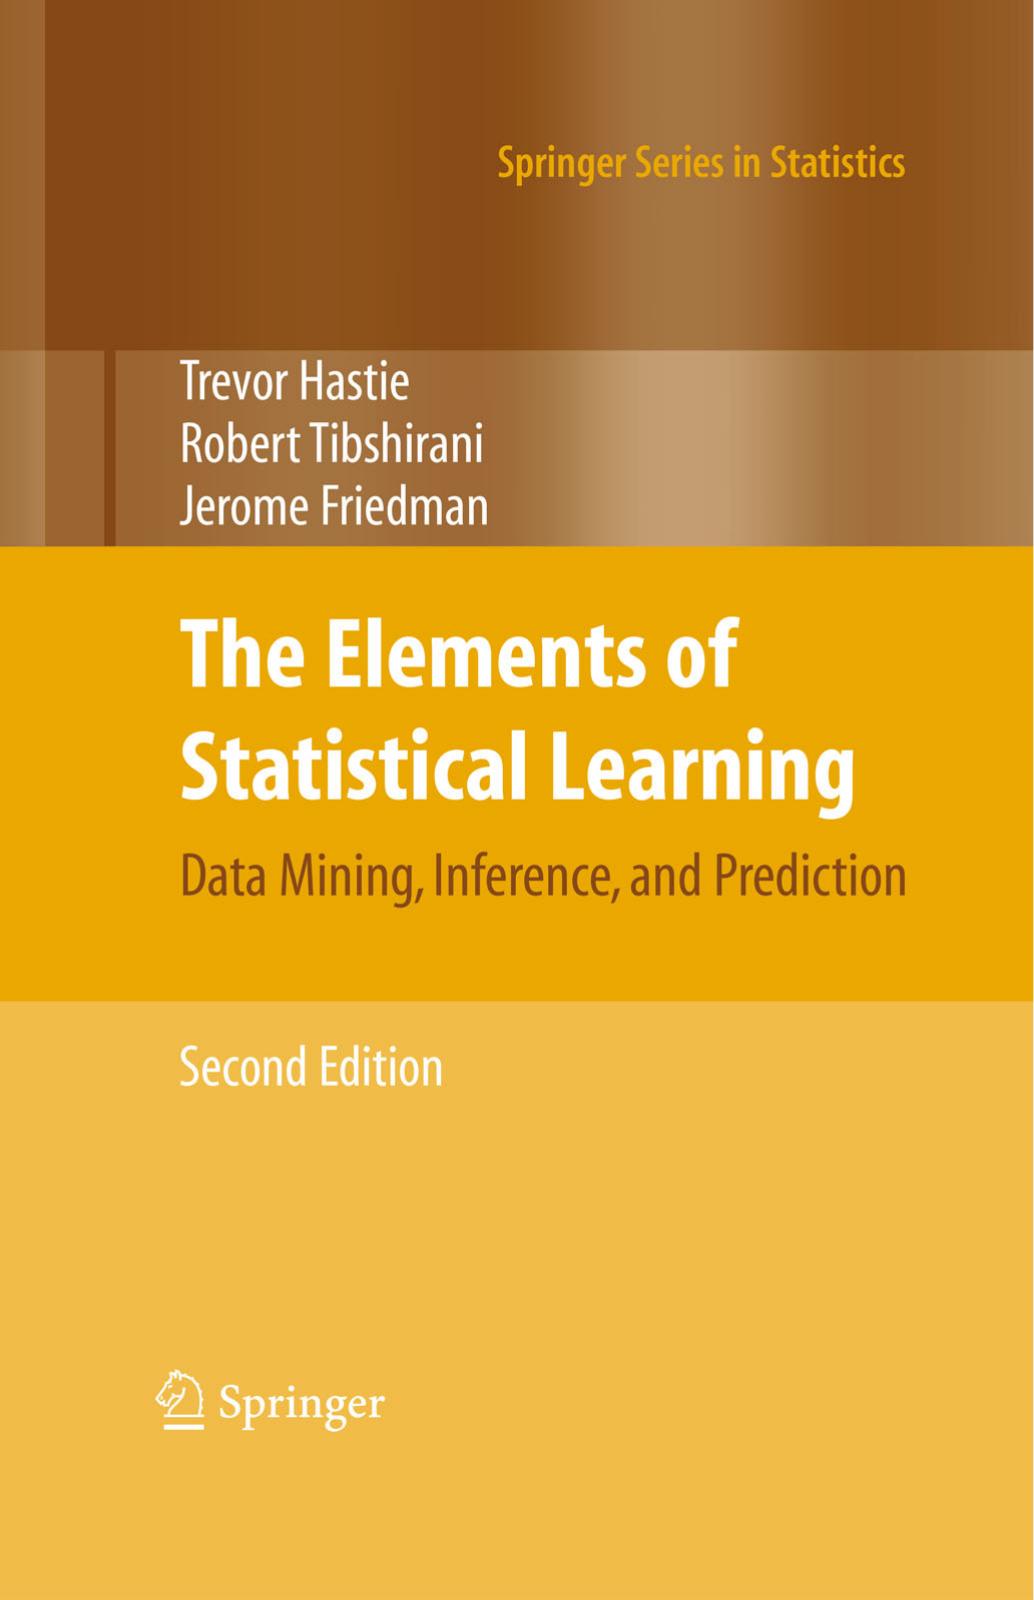 2009  Book  The Elements Of Statistical Learning dada mining